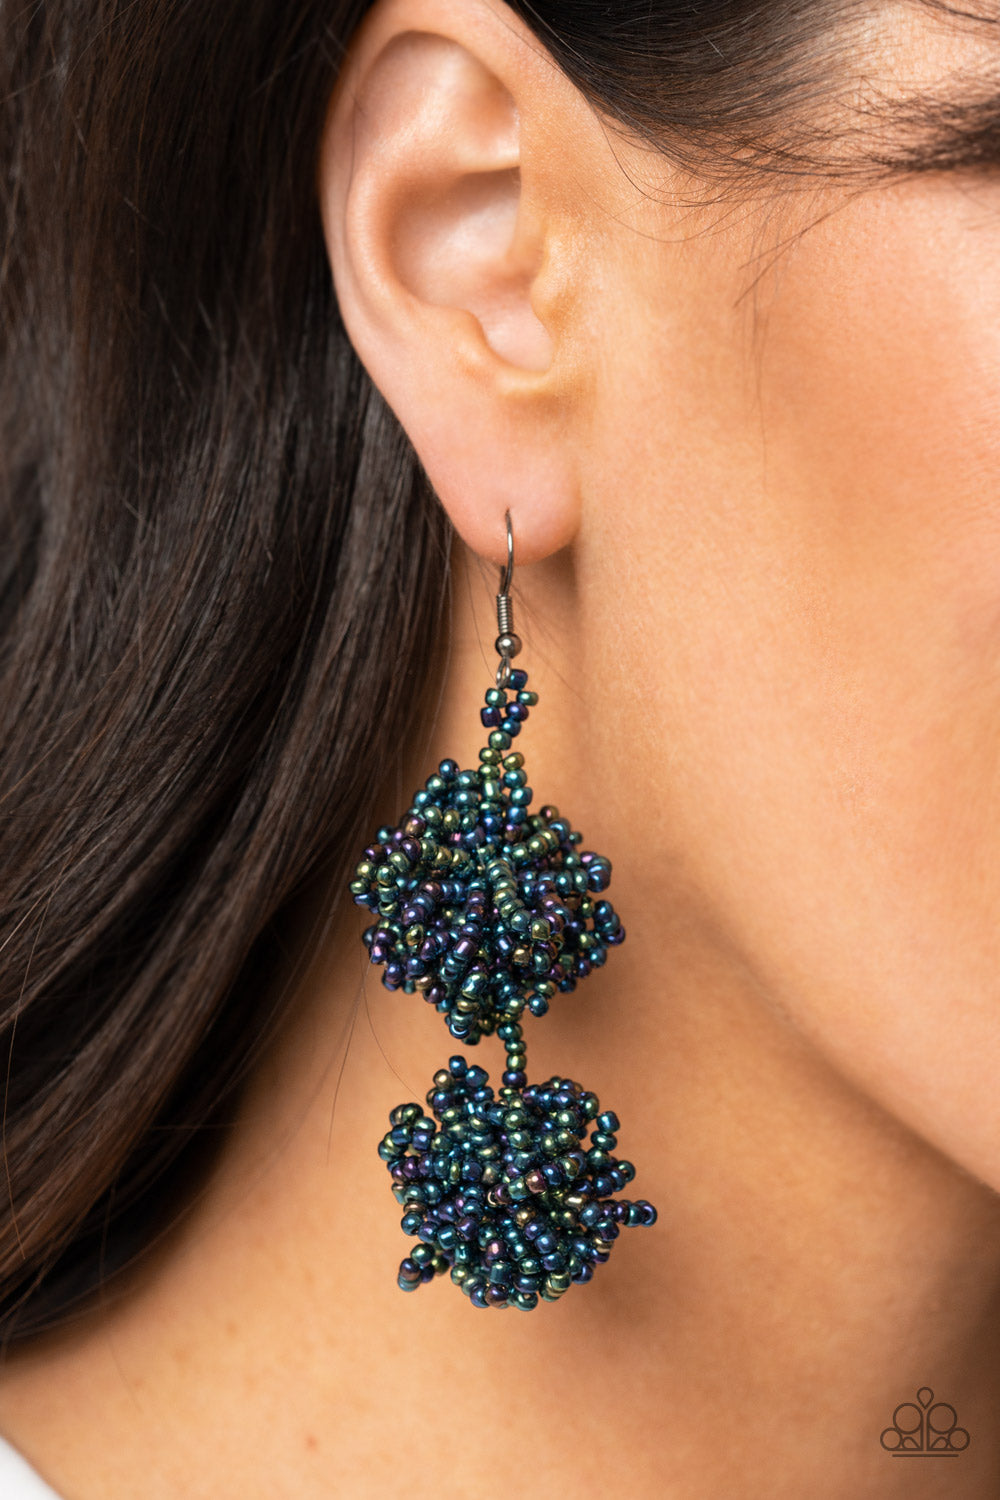 Celestial Collision - Multi Seed Bead Earrings Paparazzi Accessories